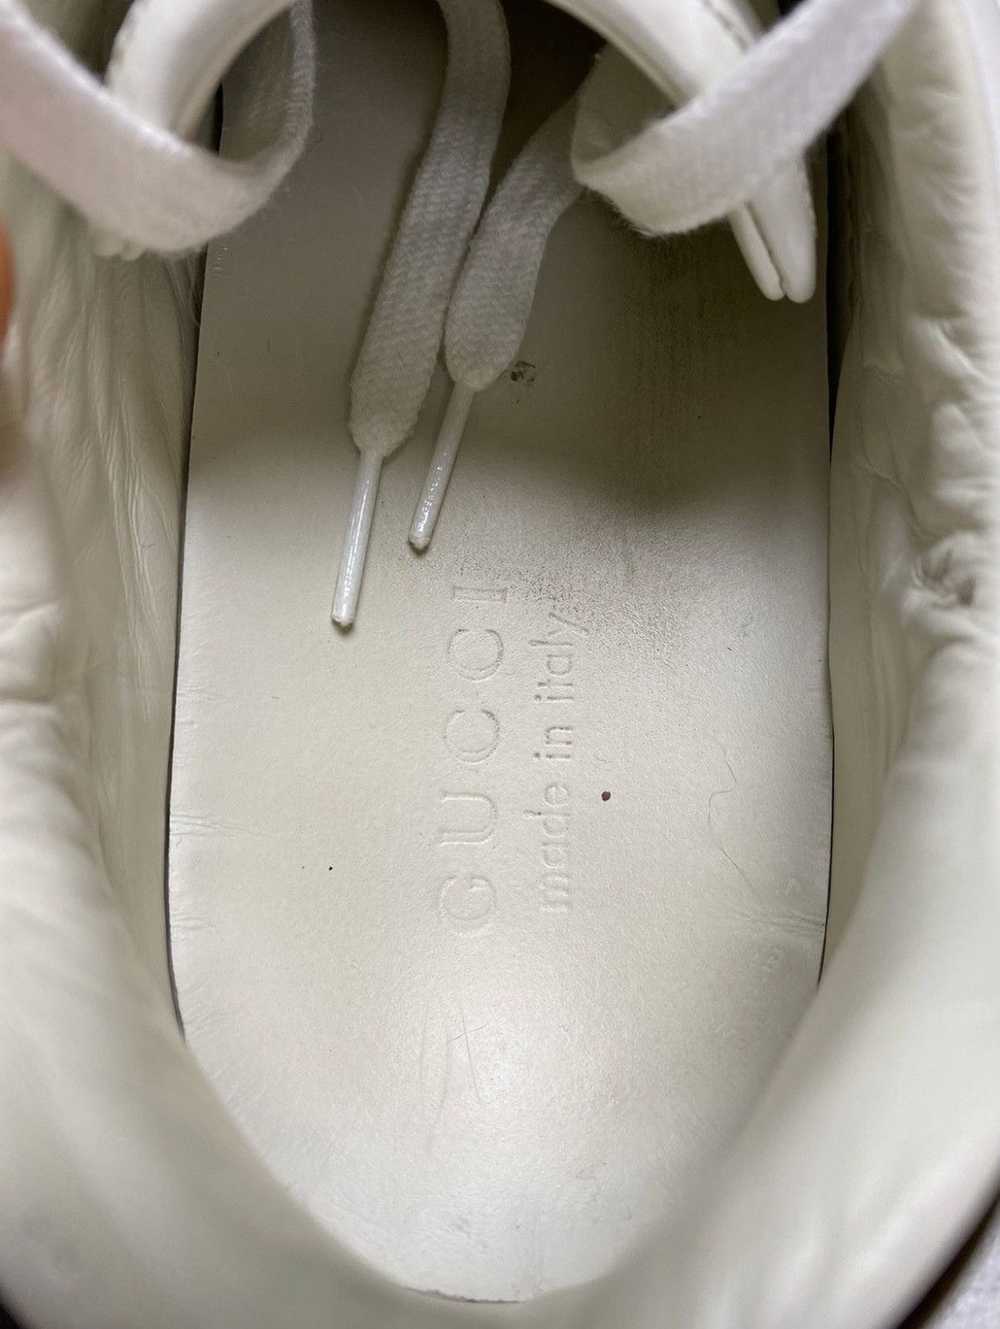 Designer × Gucci Gucci Ace “Loved” Shoes - image 6